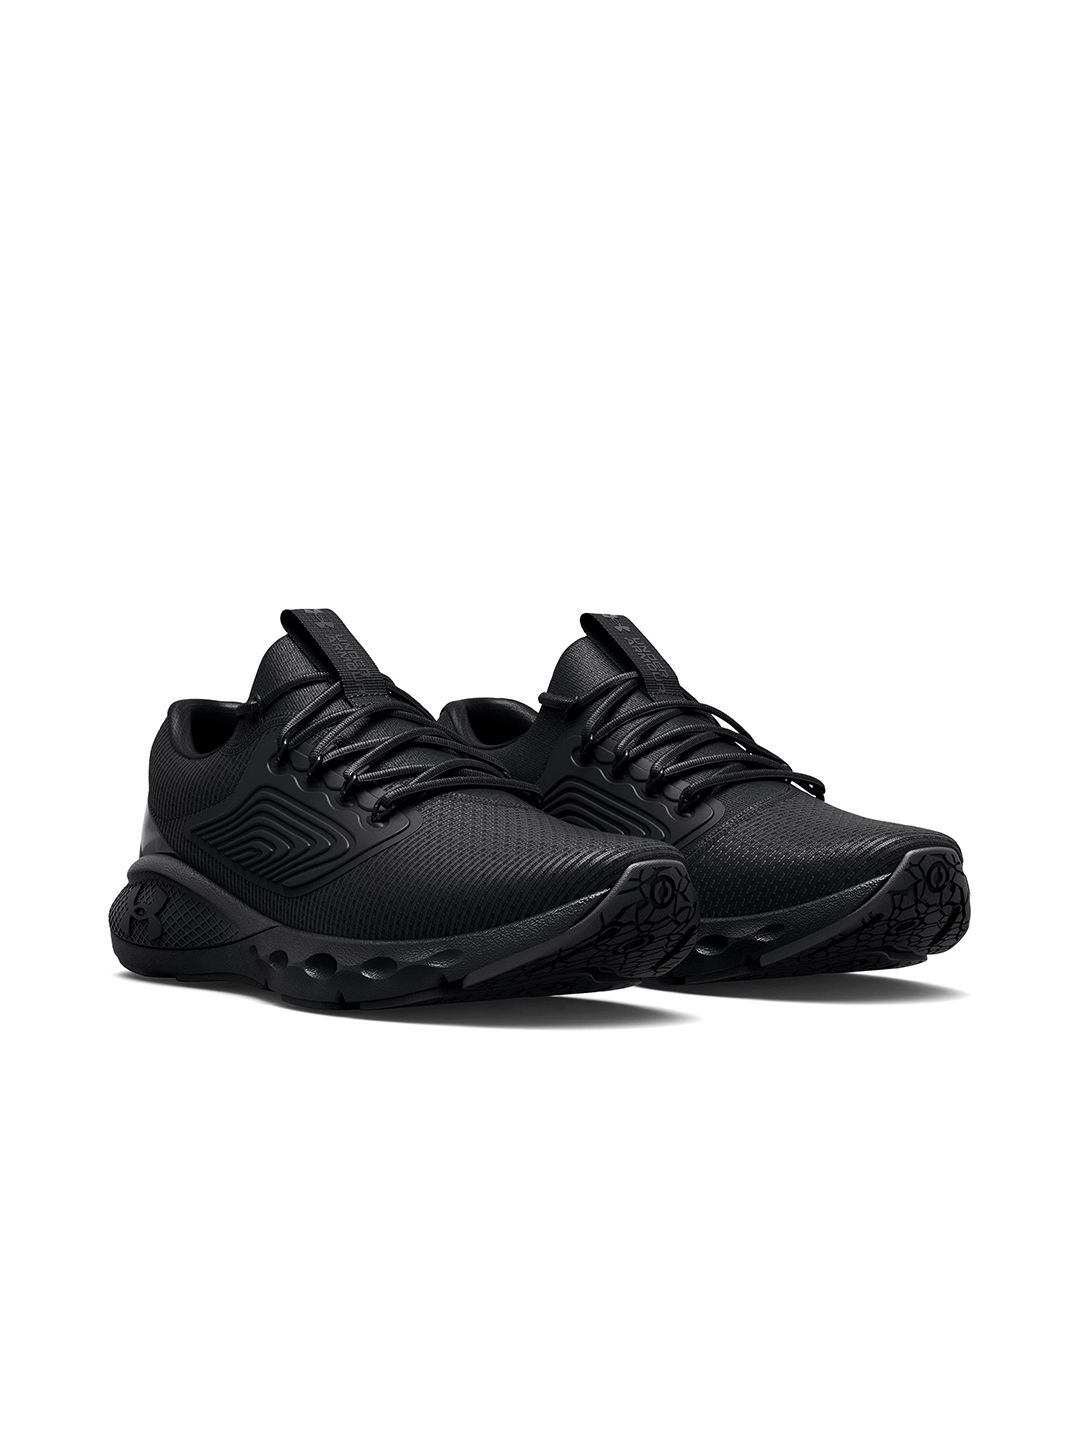 UNDER ARMOUR Women Black Woven Design Charged Vantage 2 Running Shoes Price in India